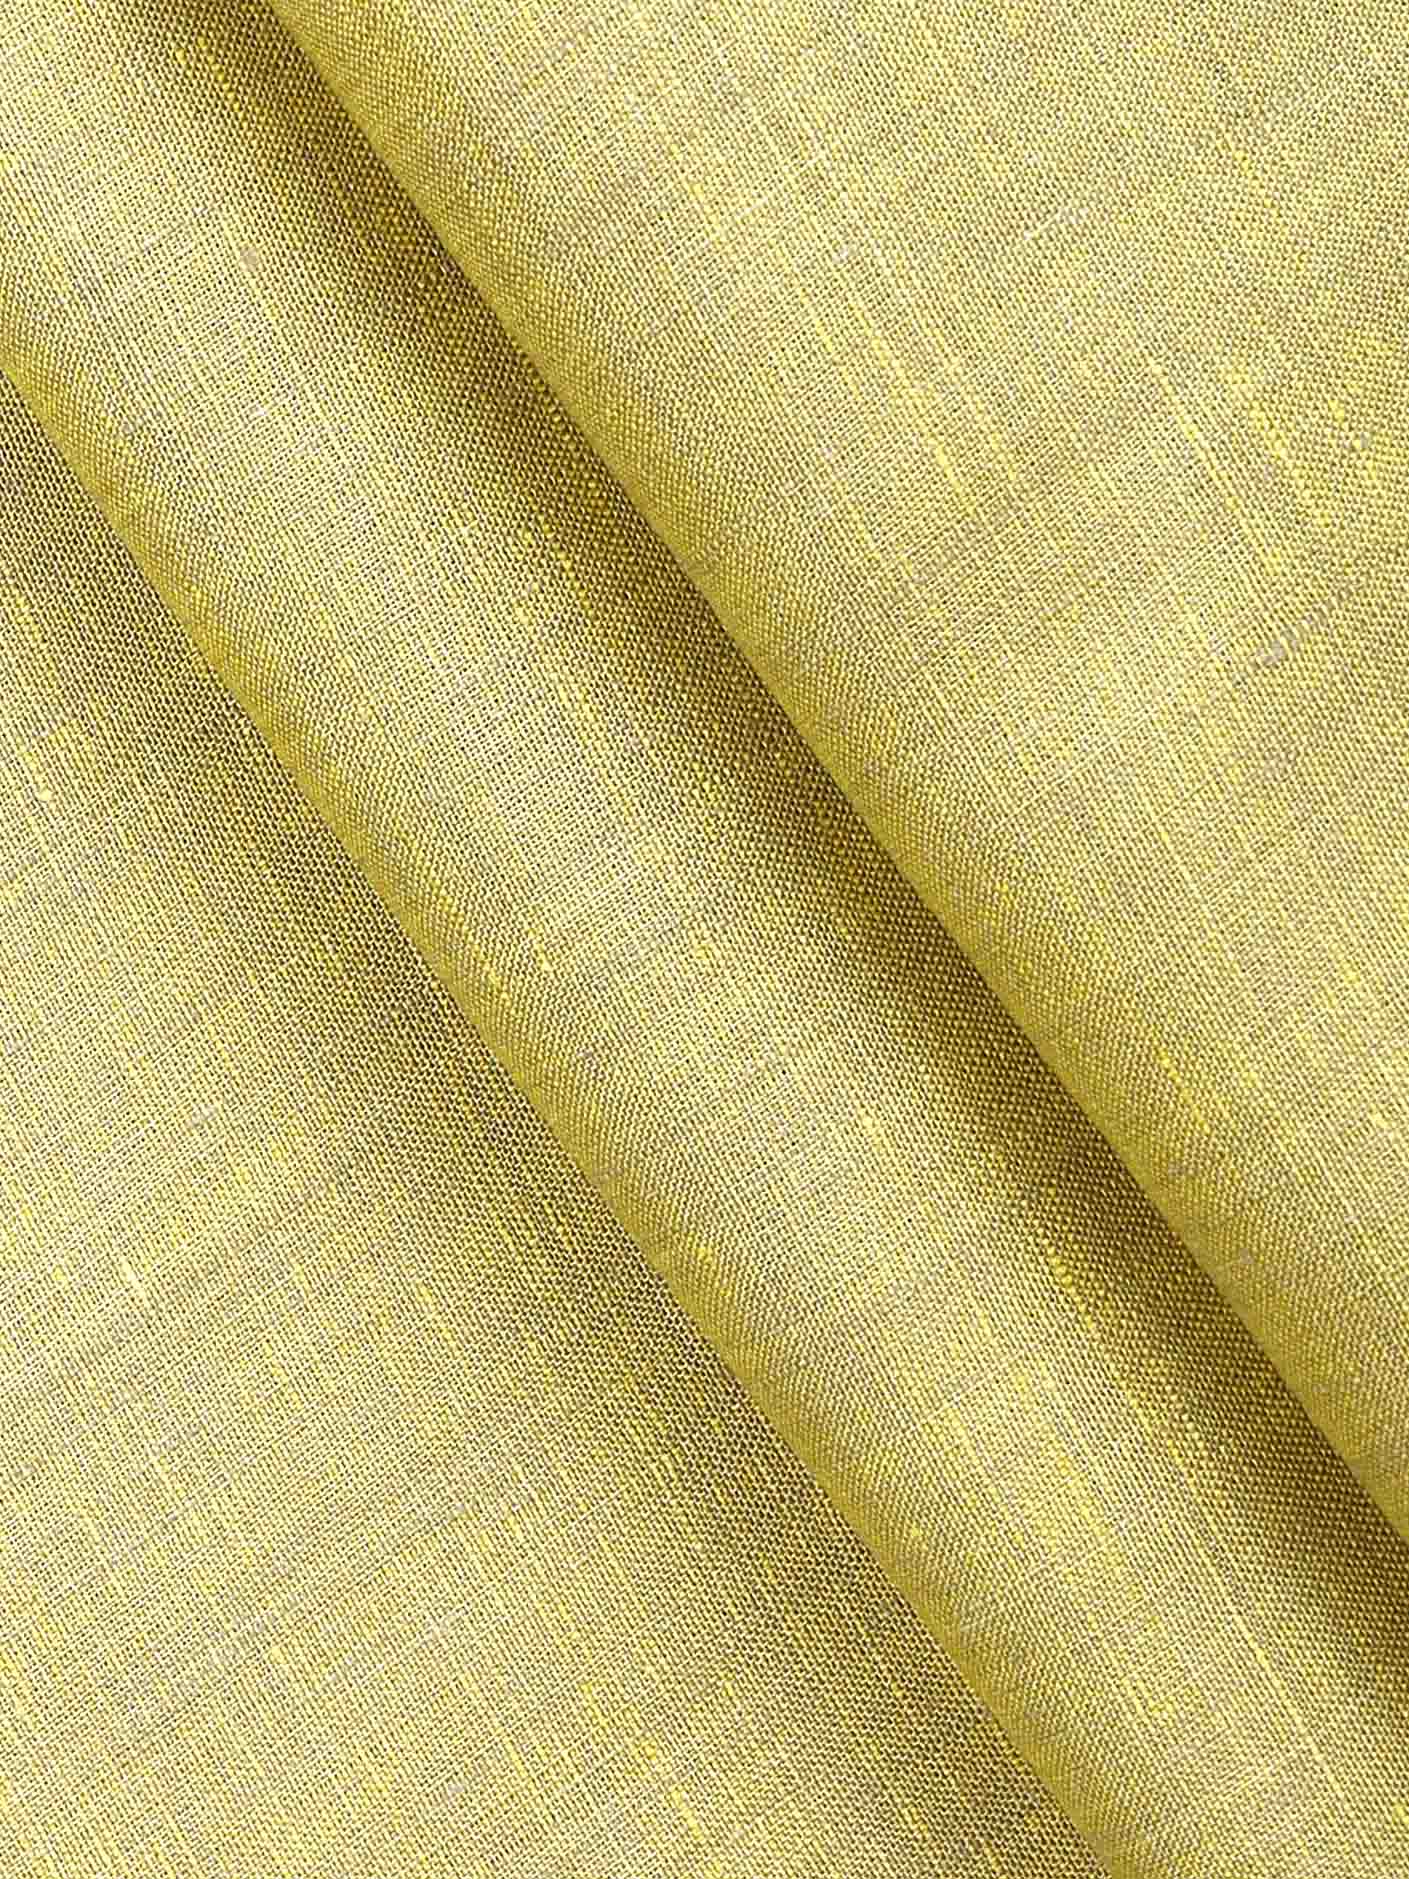 What Color is Linen Fabric?